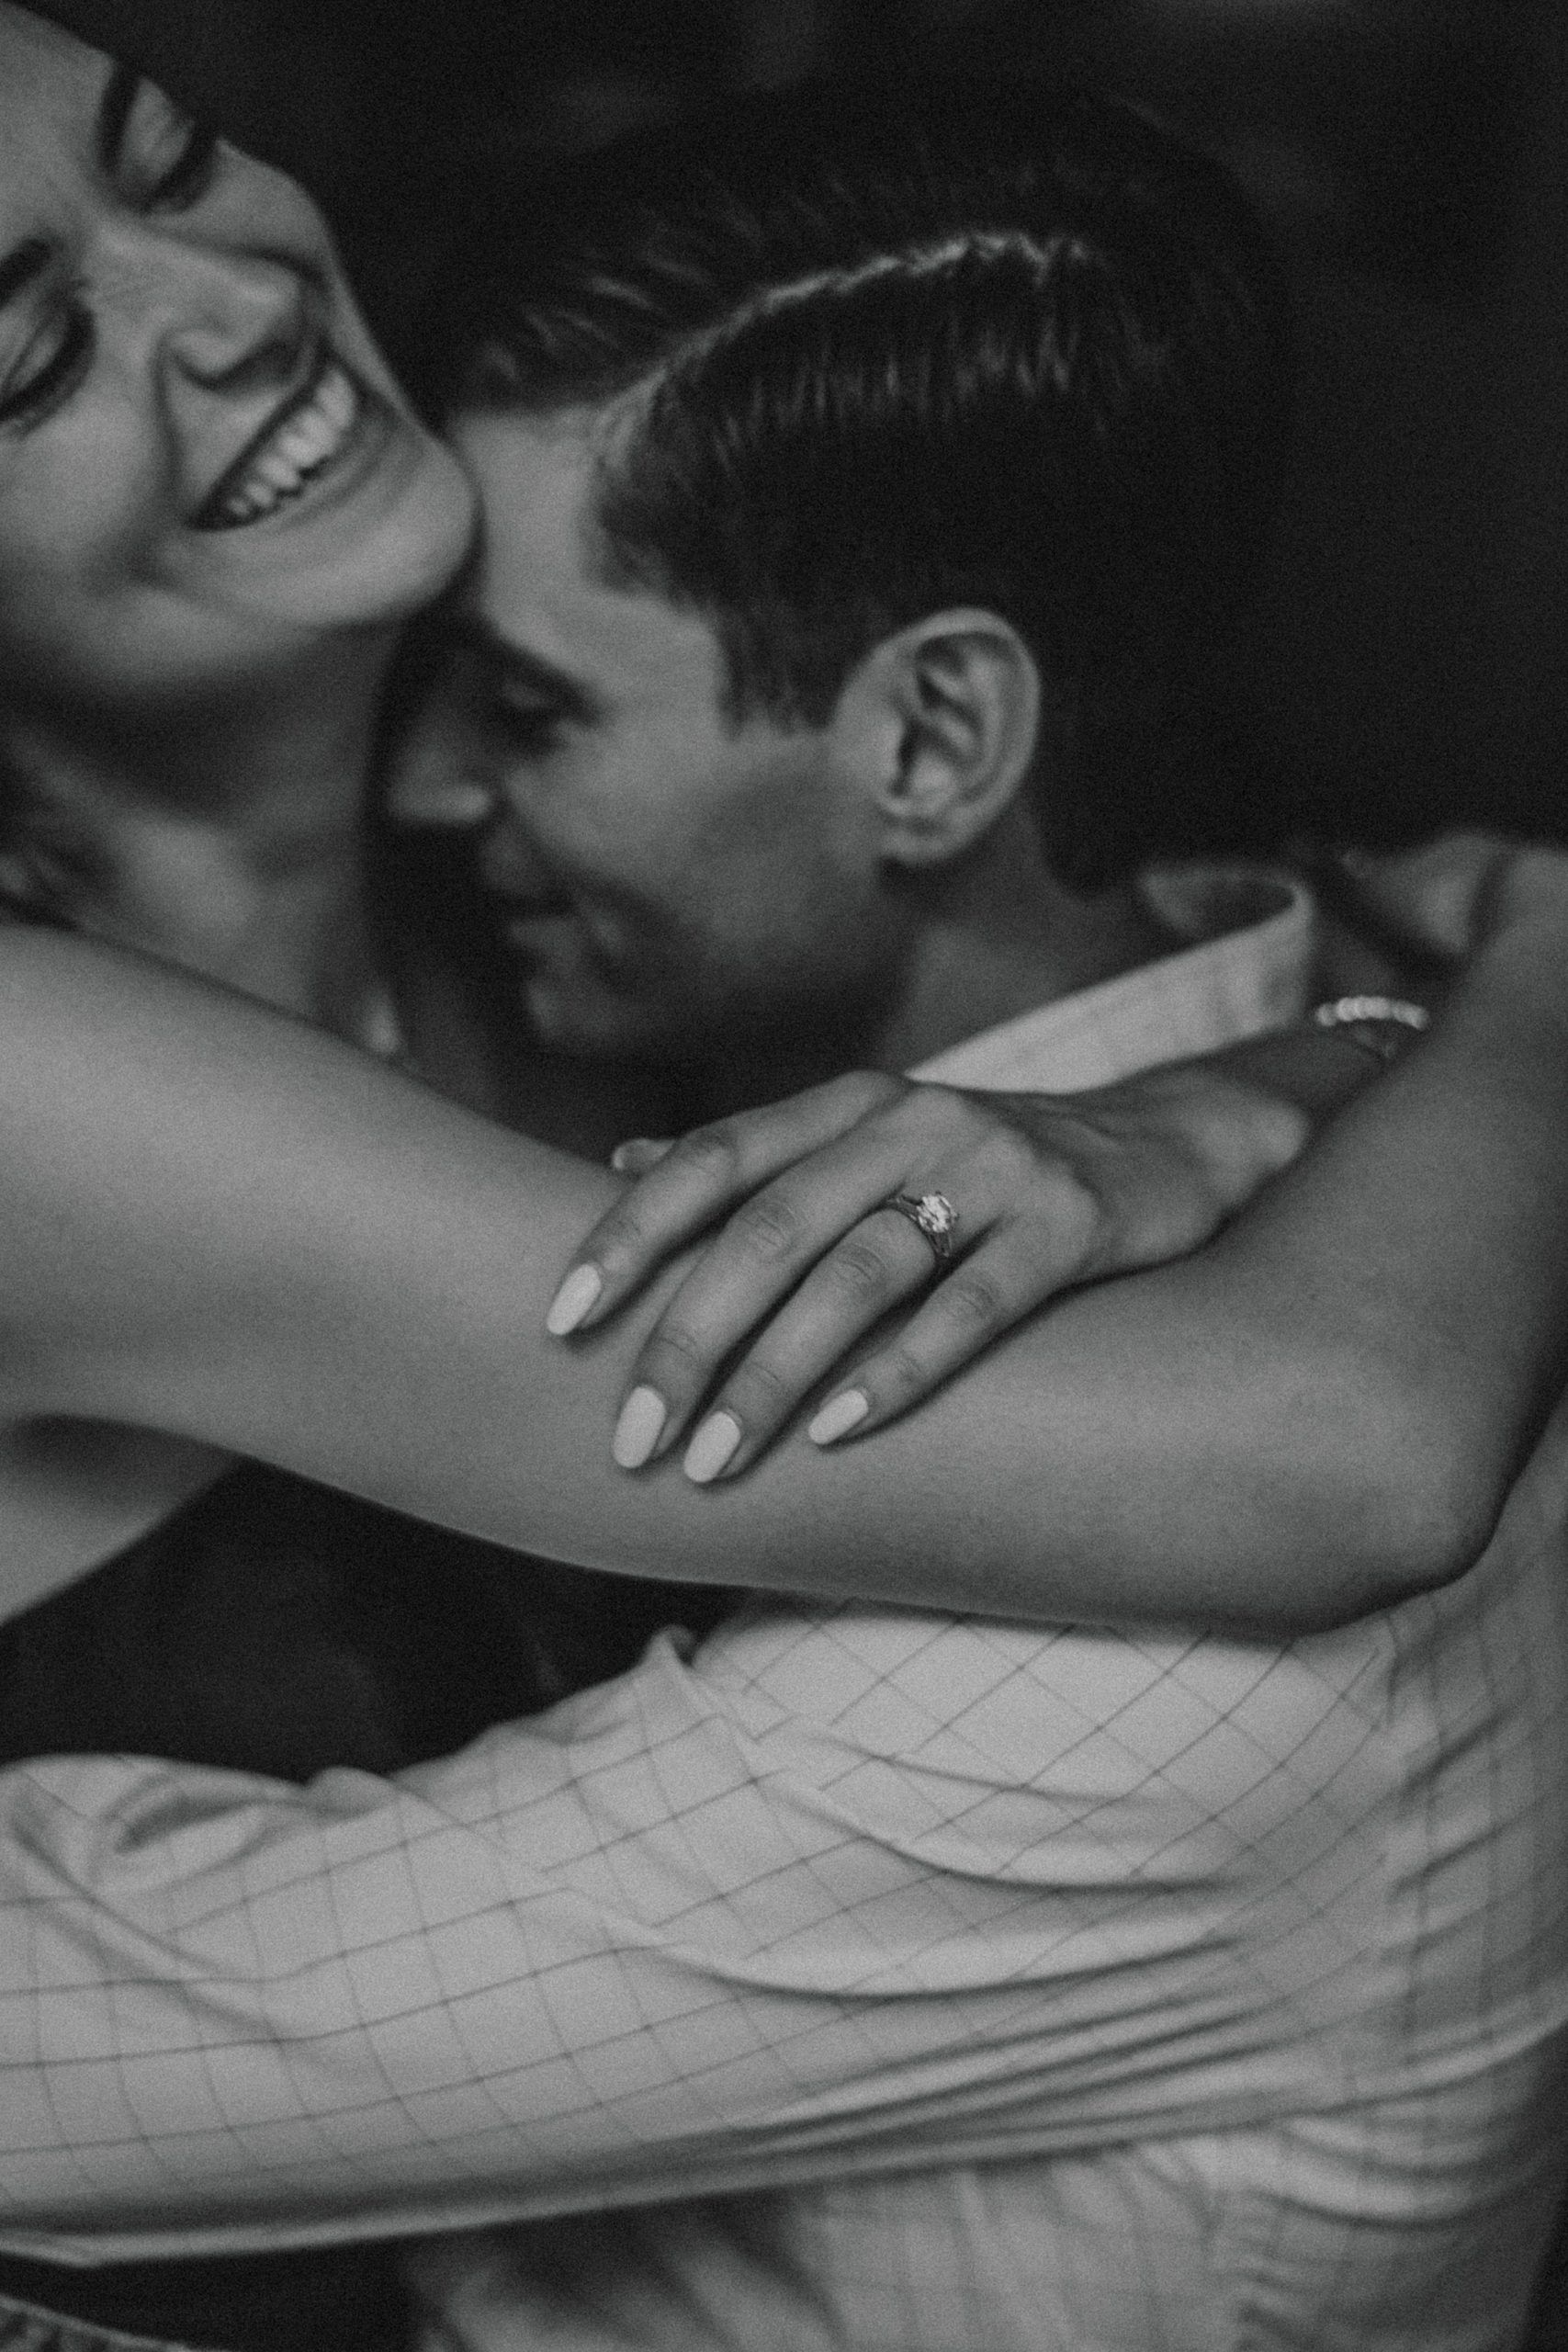 at home engagement session, New Jersey Wedding Photographer, New York Wedding Photographer, Intimate Engagement, Cozy rainy day, Chatham NJ, dancing in the living room, blurry black and white photos